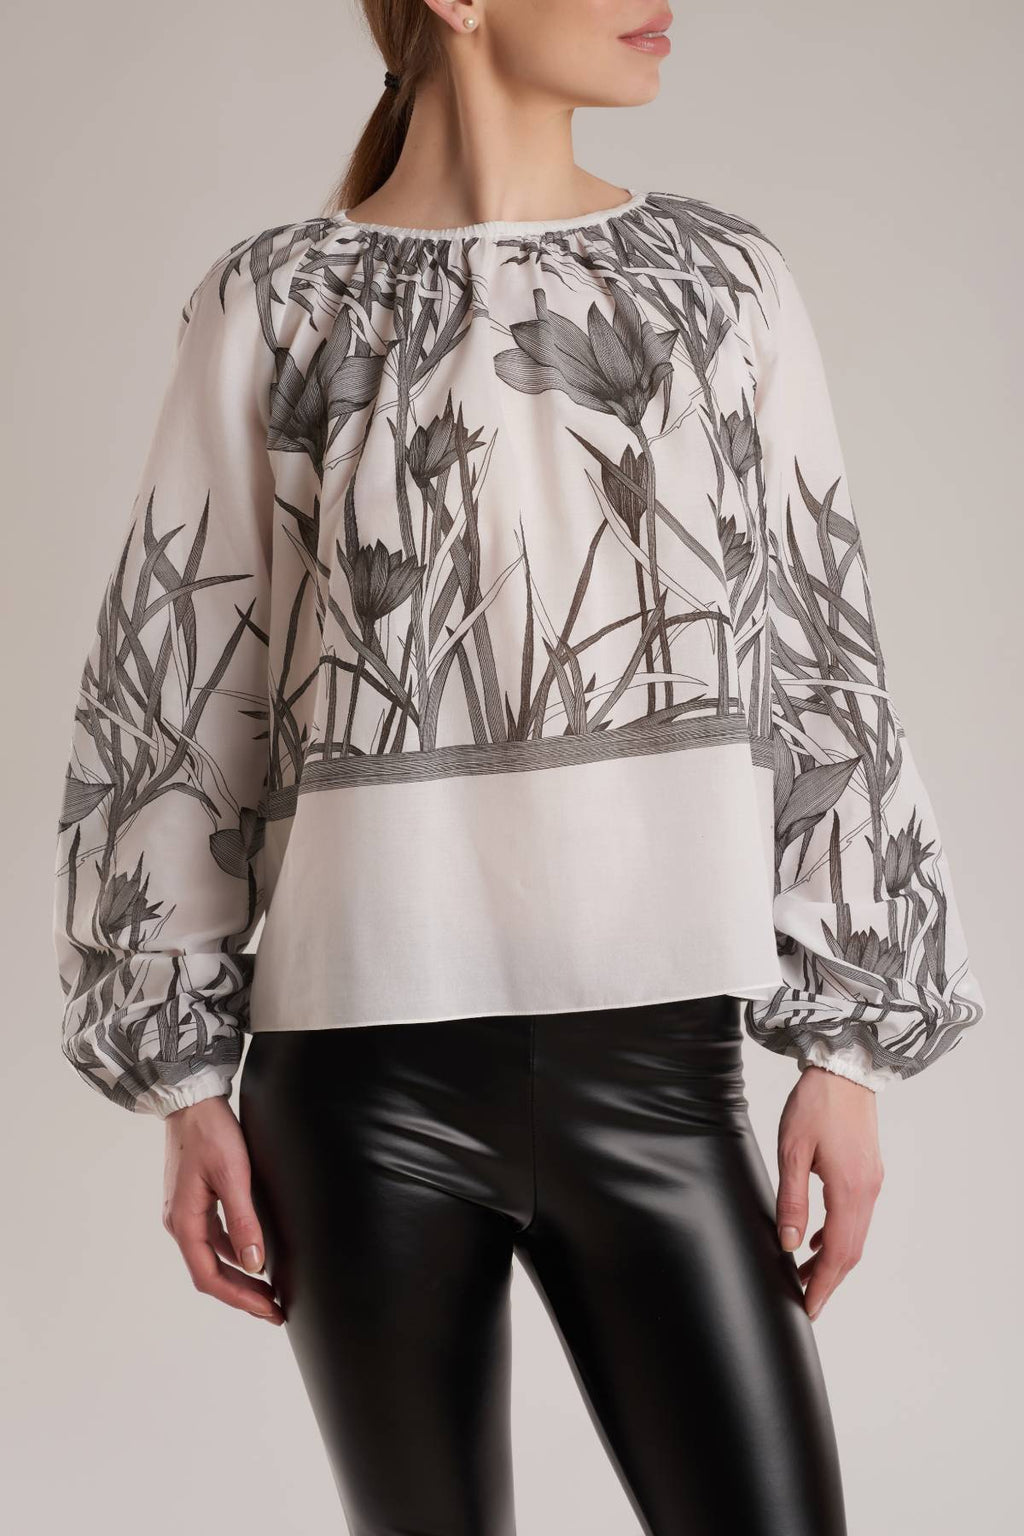 Cut for a loose fit, this top is made from soft white cotton decorated with black graphic floral print. 